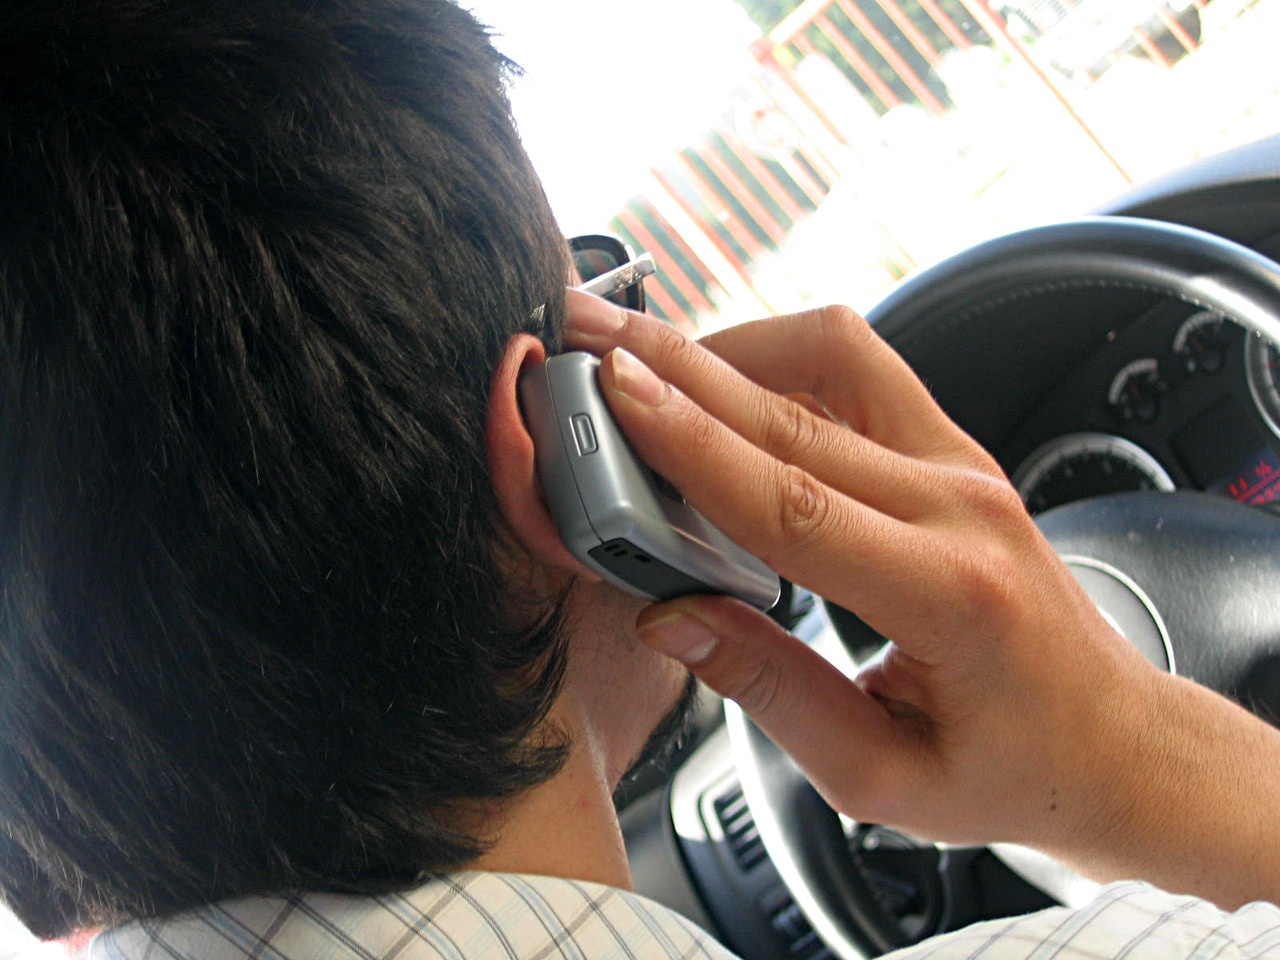 Mobile phone use while driving: hands-free dangerous according to a recent study